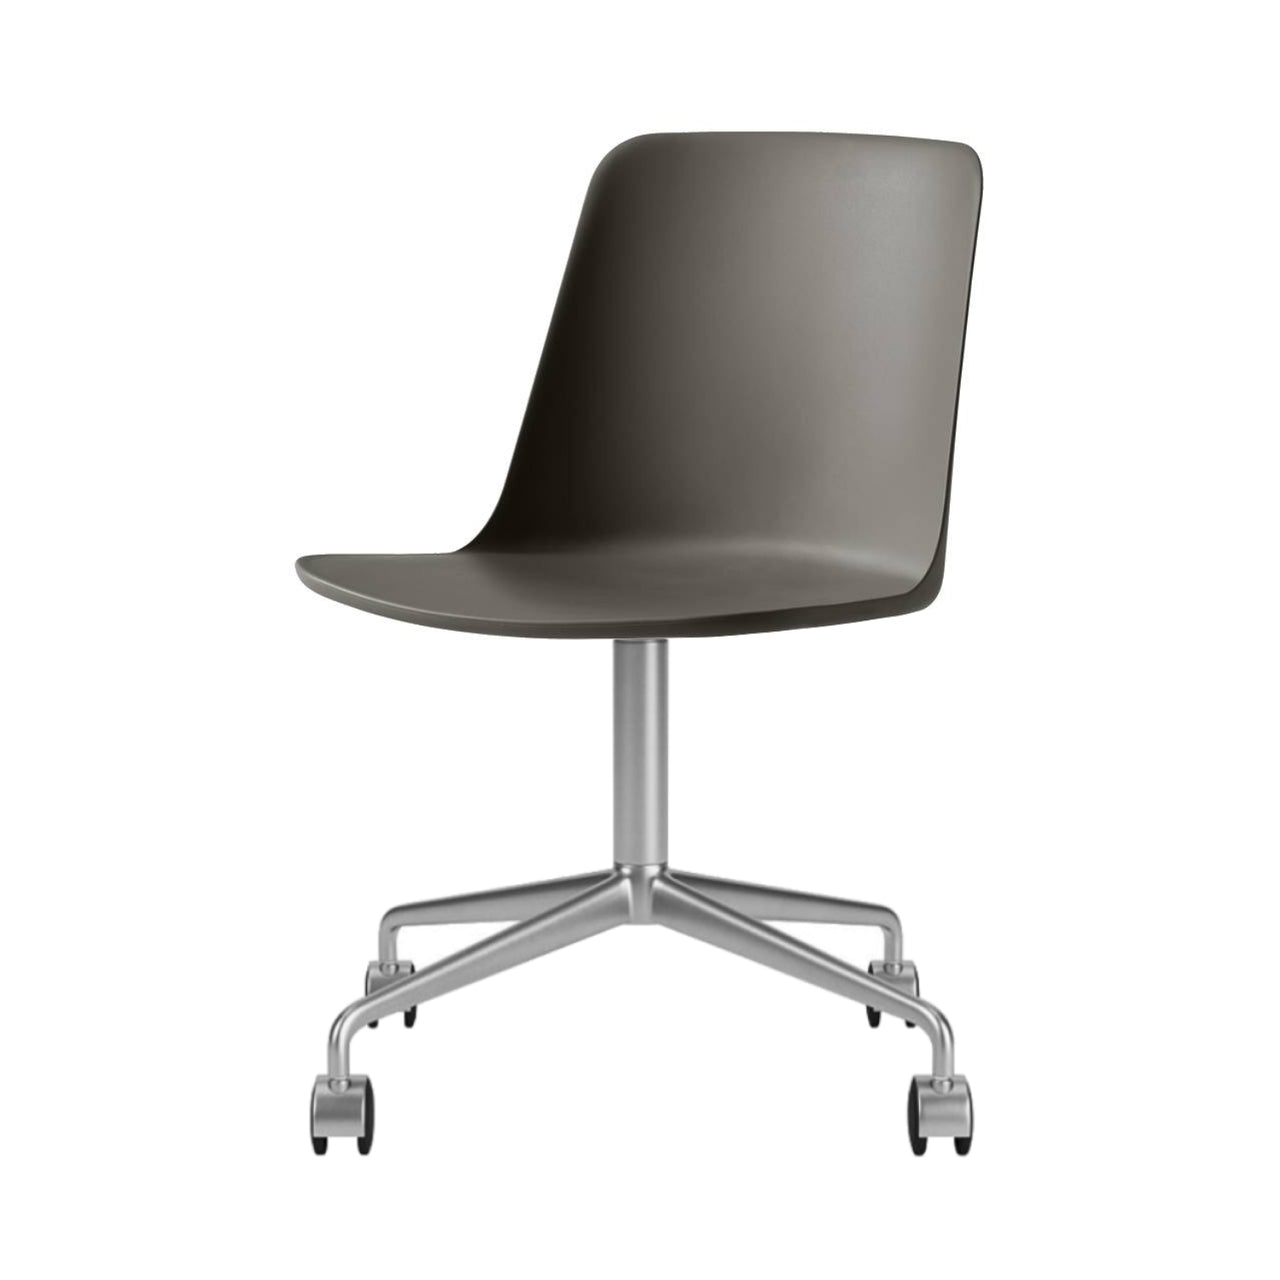 Rely Chair HW21: Stone Grey + Polished Aluminum